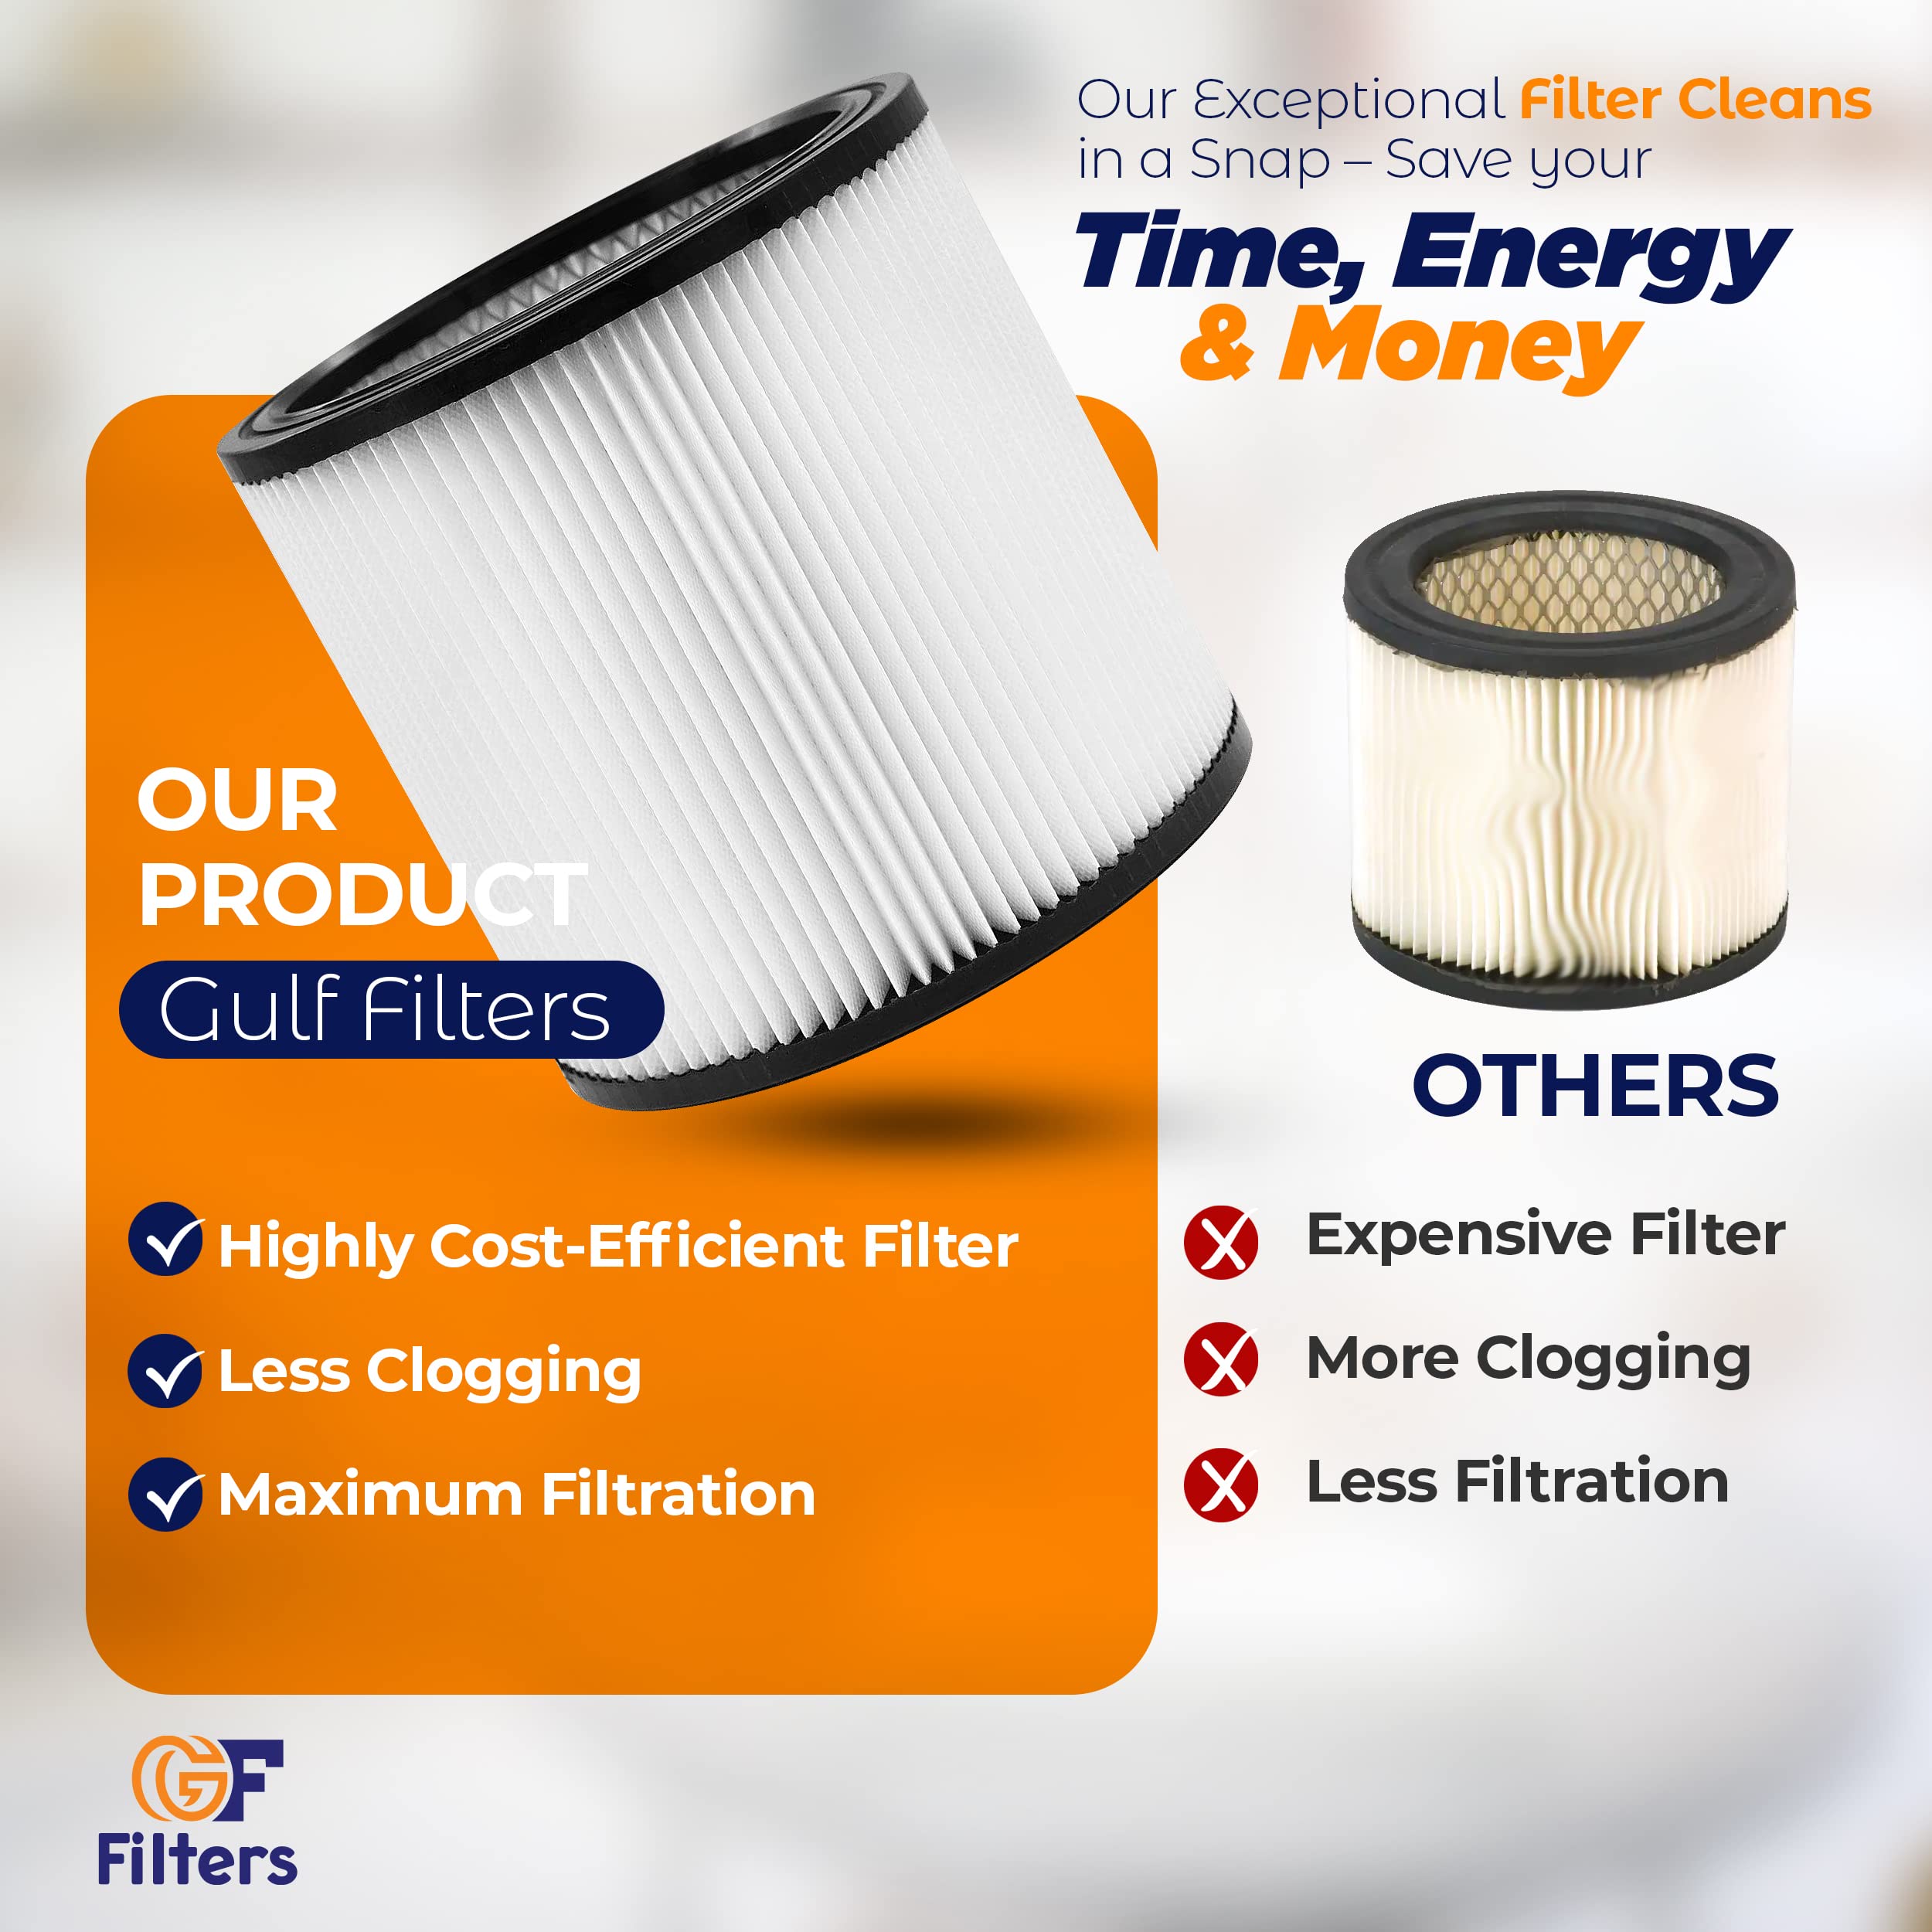 Replacement Filter for Shop Vac Models 90304, 90350, 90333 - Wet/Dry High Absorption and Long-Lasting Paper Sieve for Shop Vac Filters - Disposable Filter that Fits Most Vacuums, 5 Gallon and Above